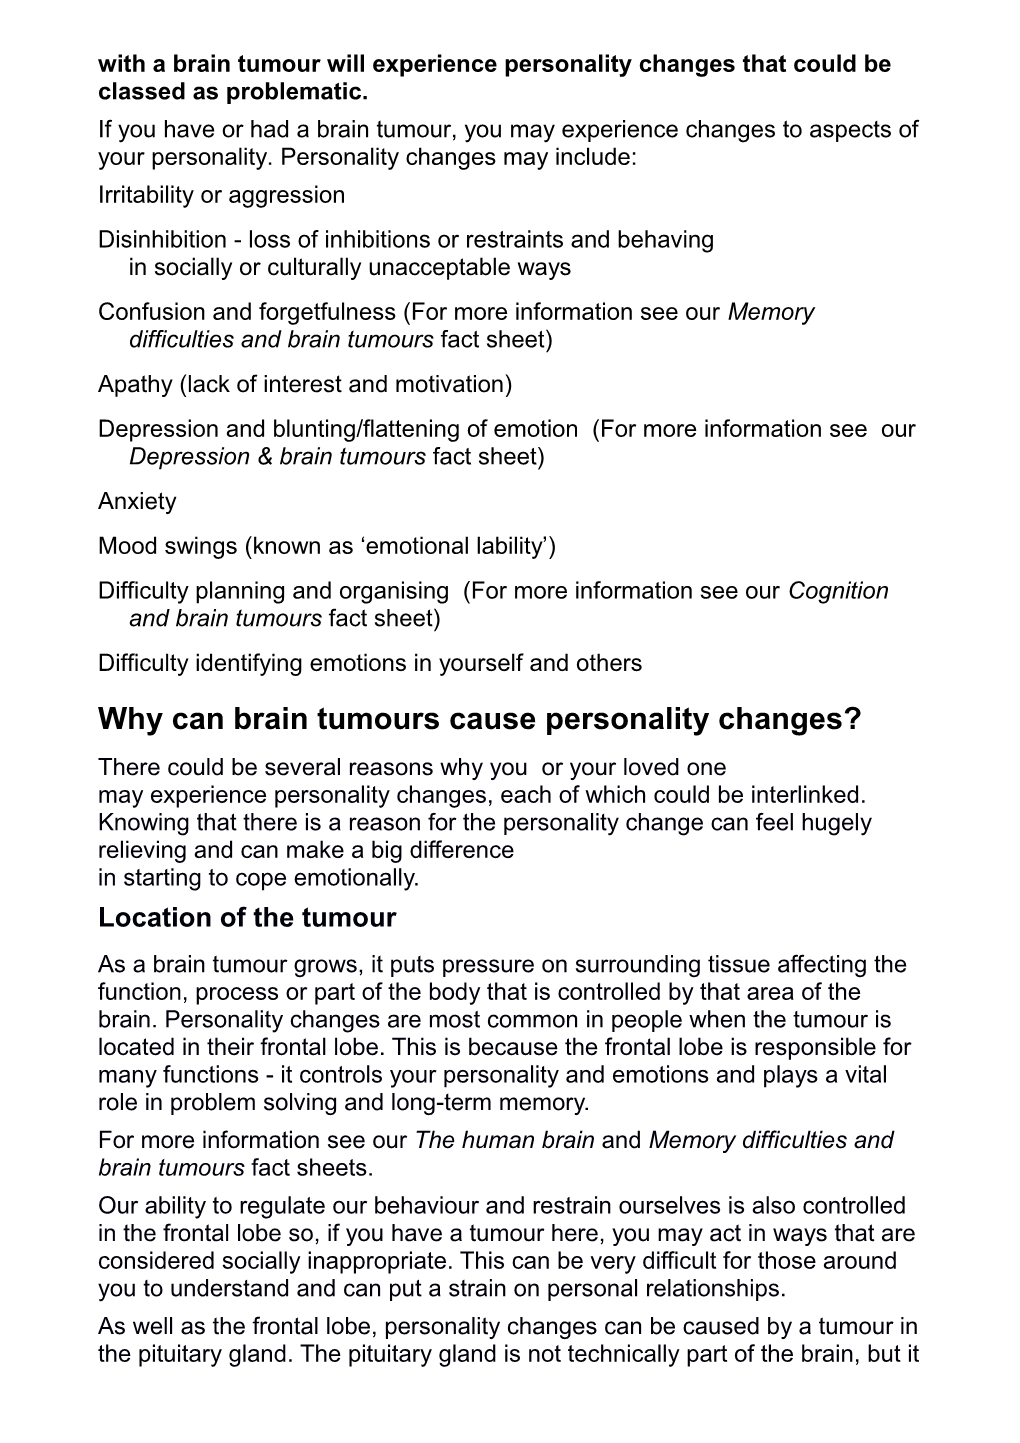 Personality Changes and Brain Tumours